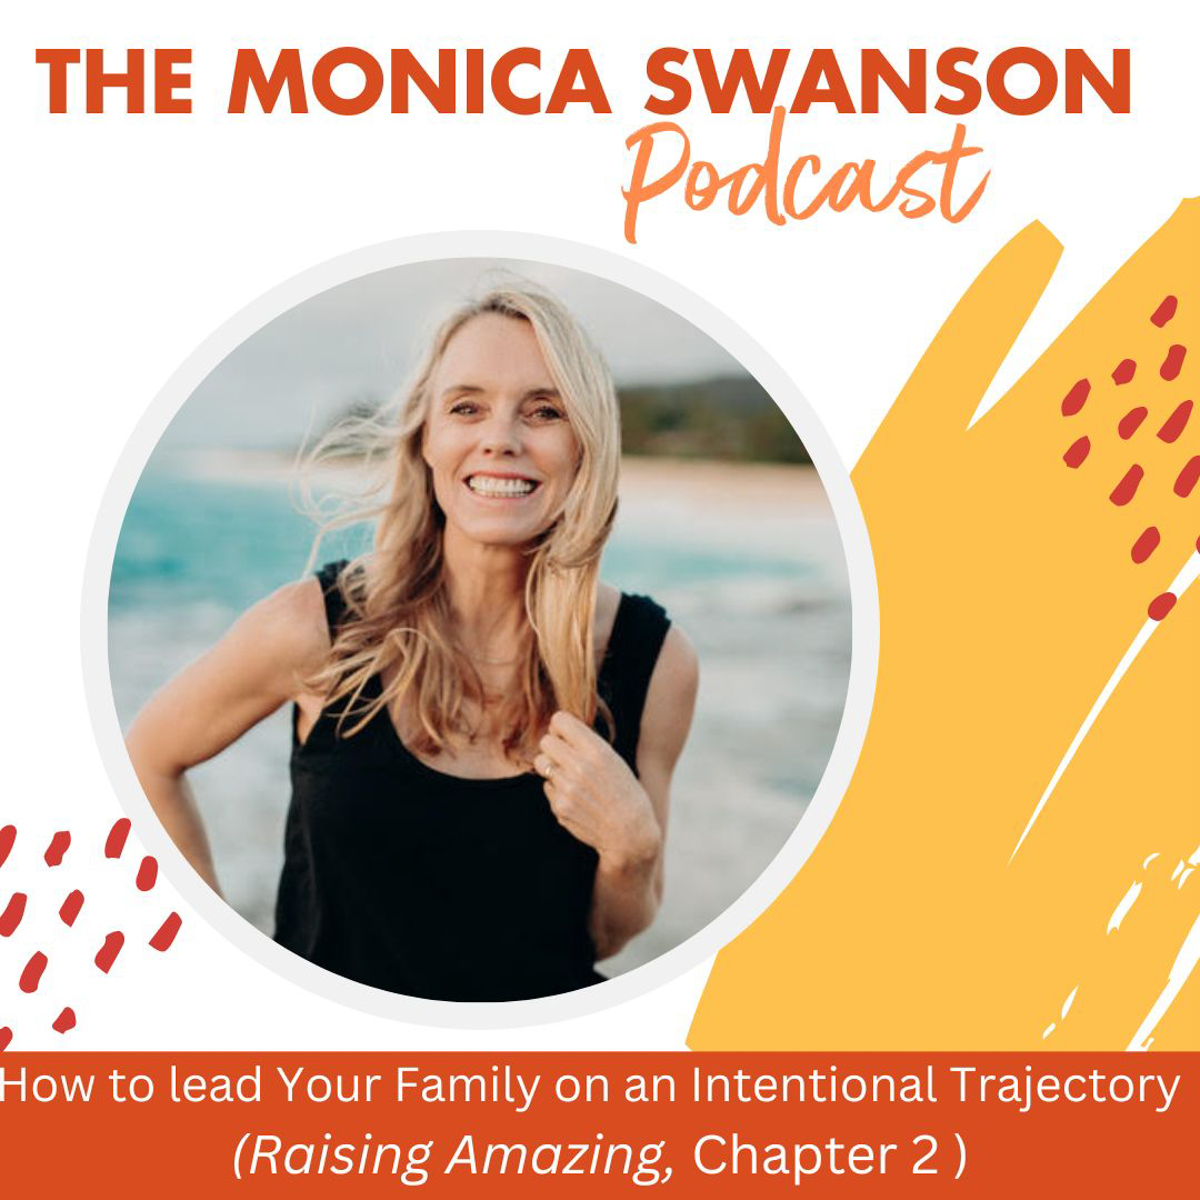 How to Lead Your Family on an Intentional Trajectory (Raising Amazing, Chapter 2 with Monica